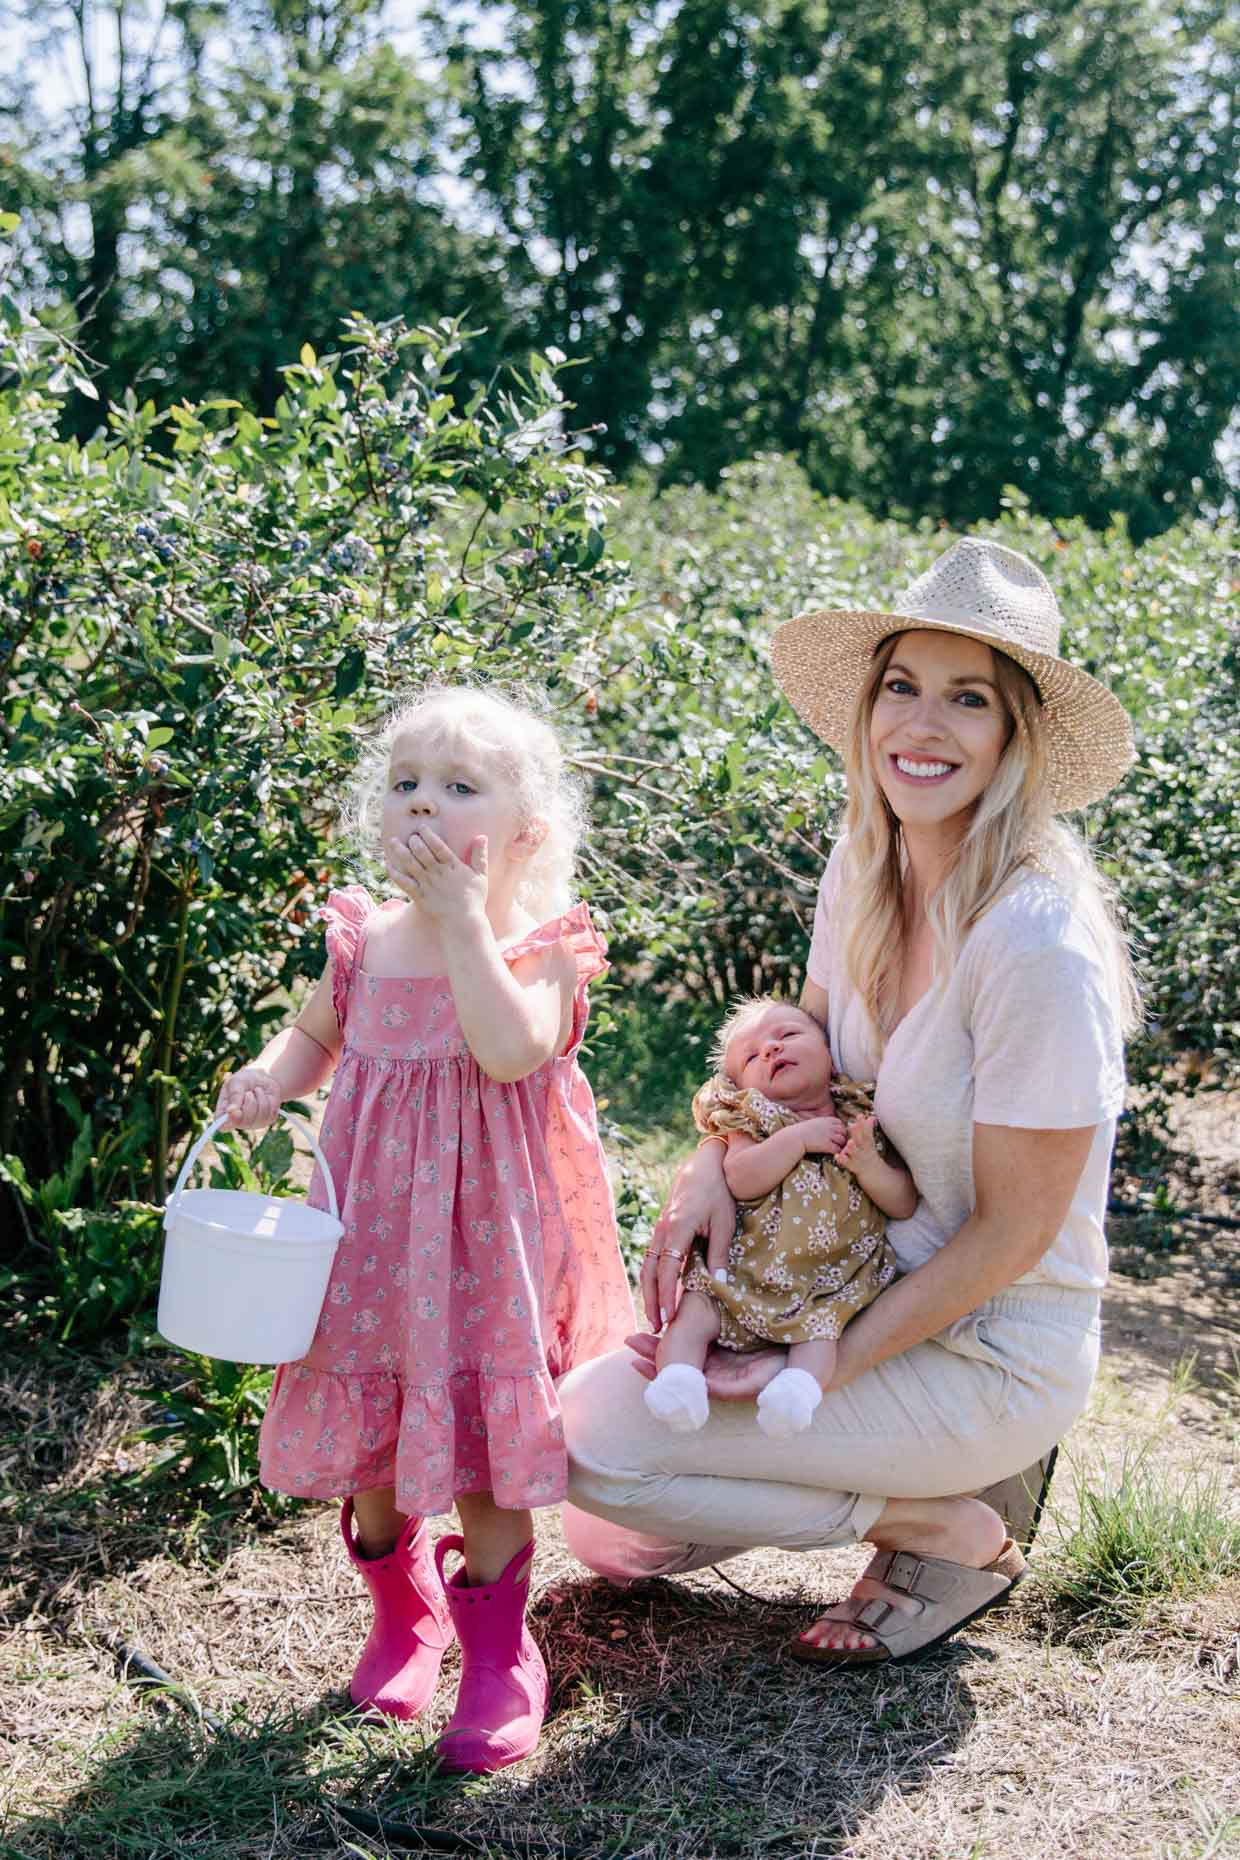 Meagan Brandon style influencer shares best spots to go blueberry picking in the Shenandoah Valley